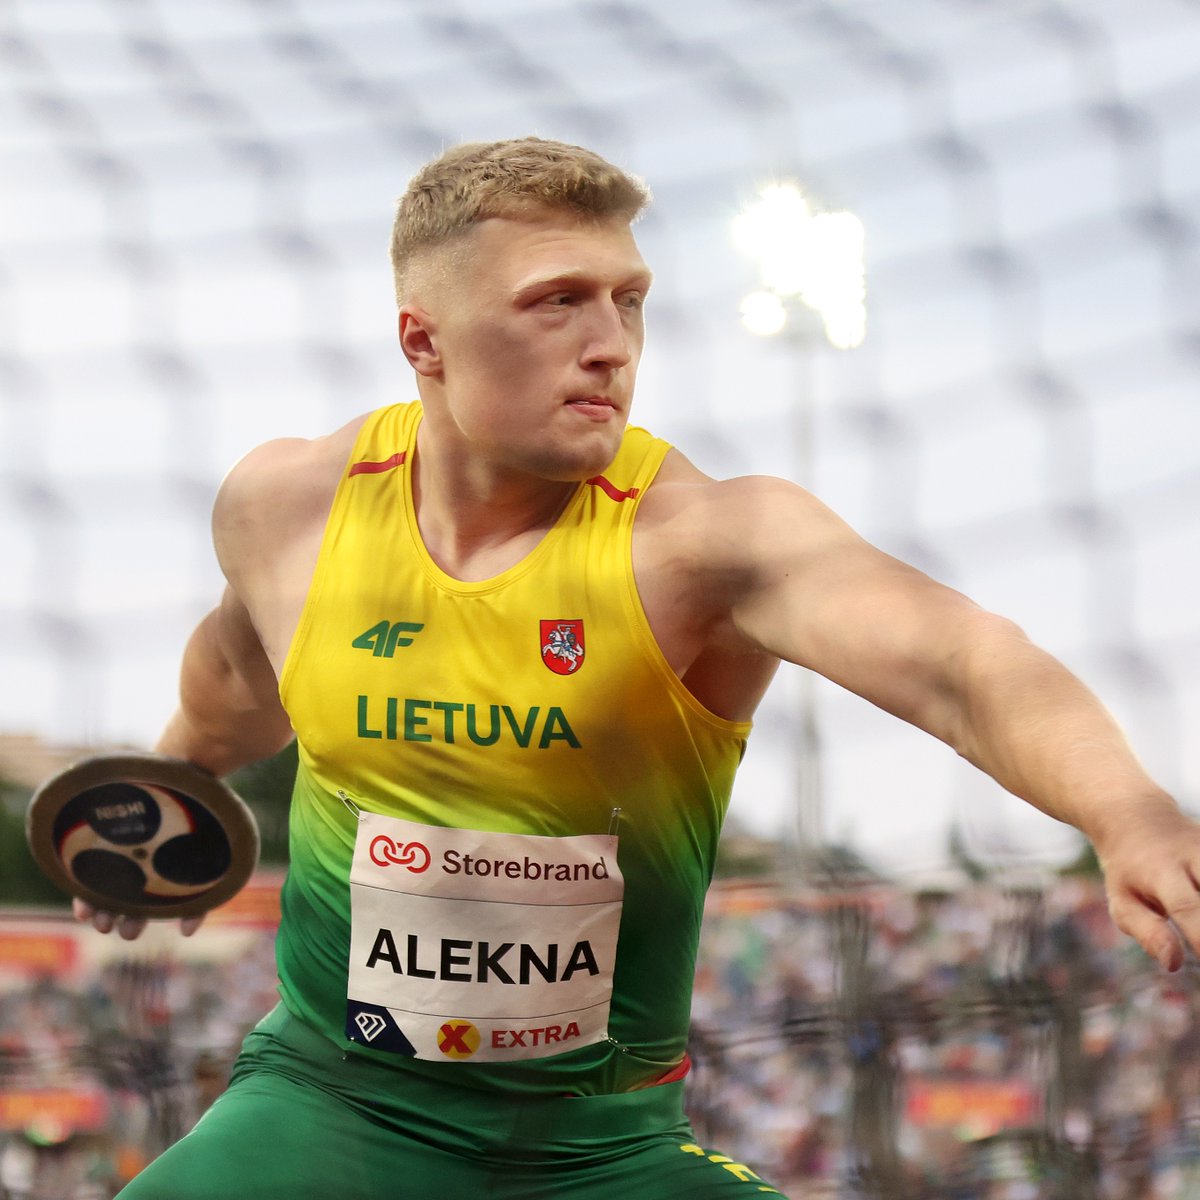 Like father, like son 🫶 Mykolas Alekna breaks the @BislettGames discus throw meet record held by his father Virgilius. 70.91m for the win 🤟 #DiamondLeague